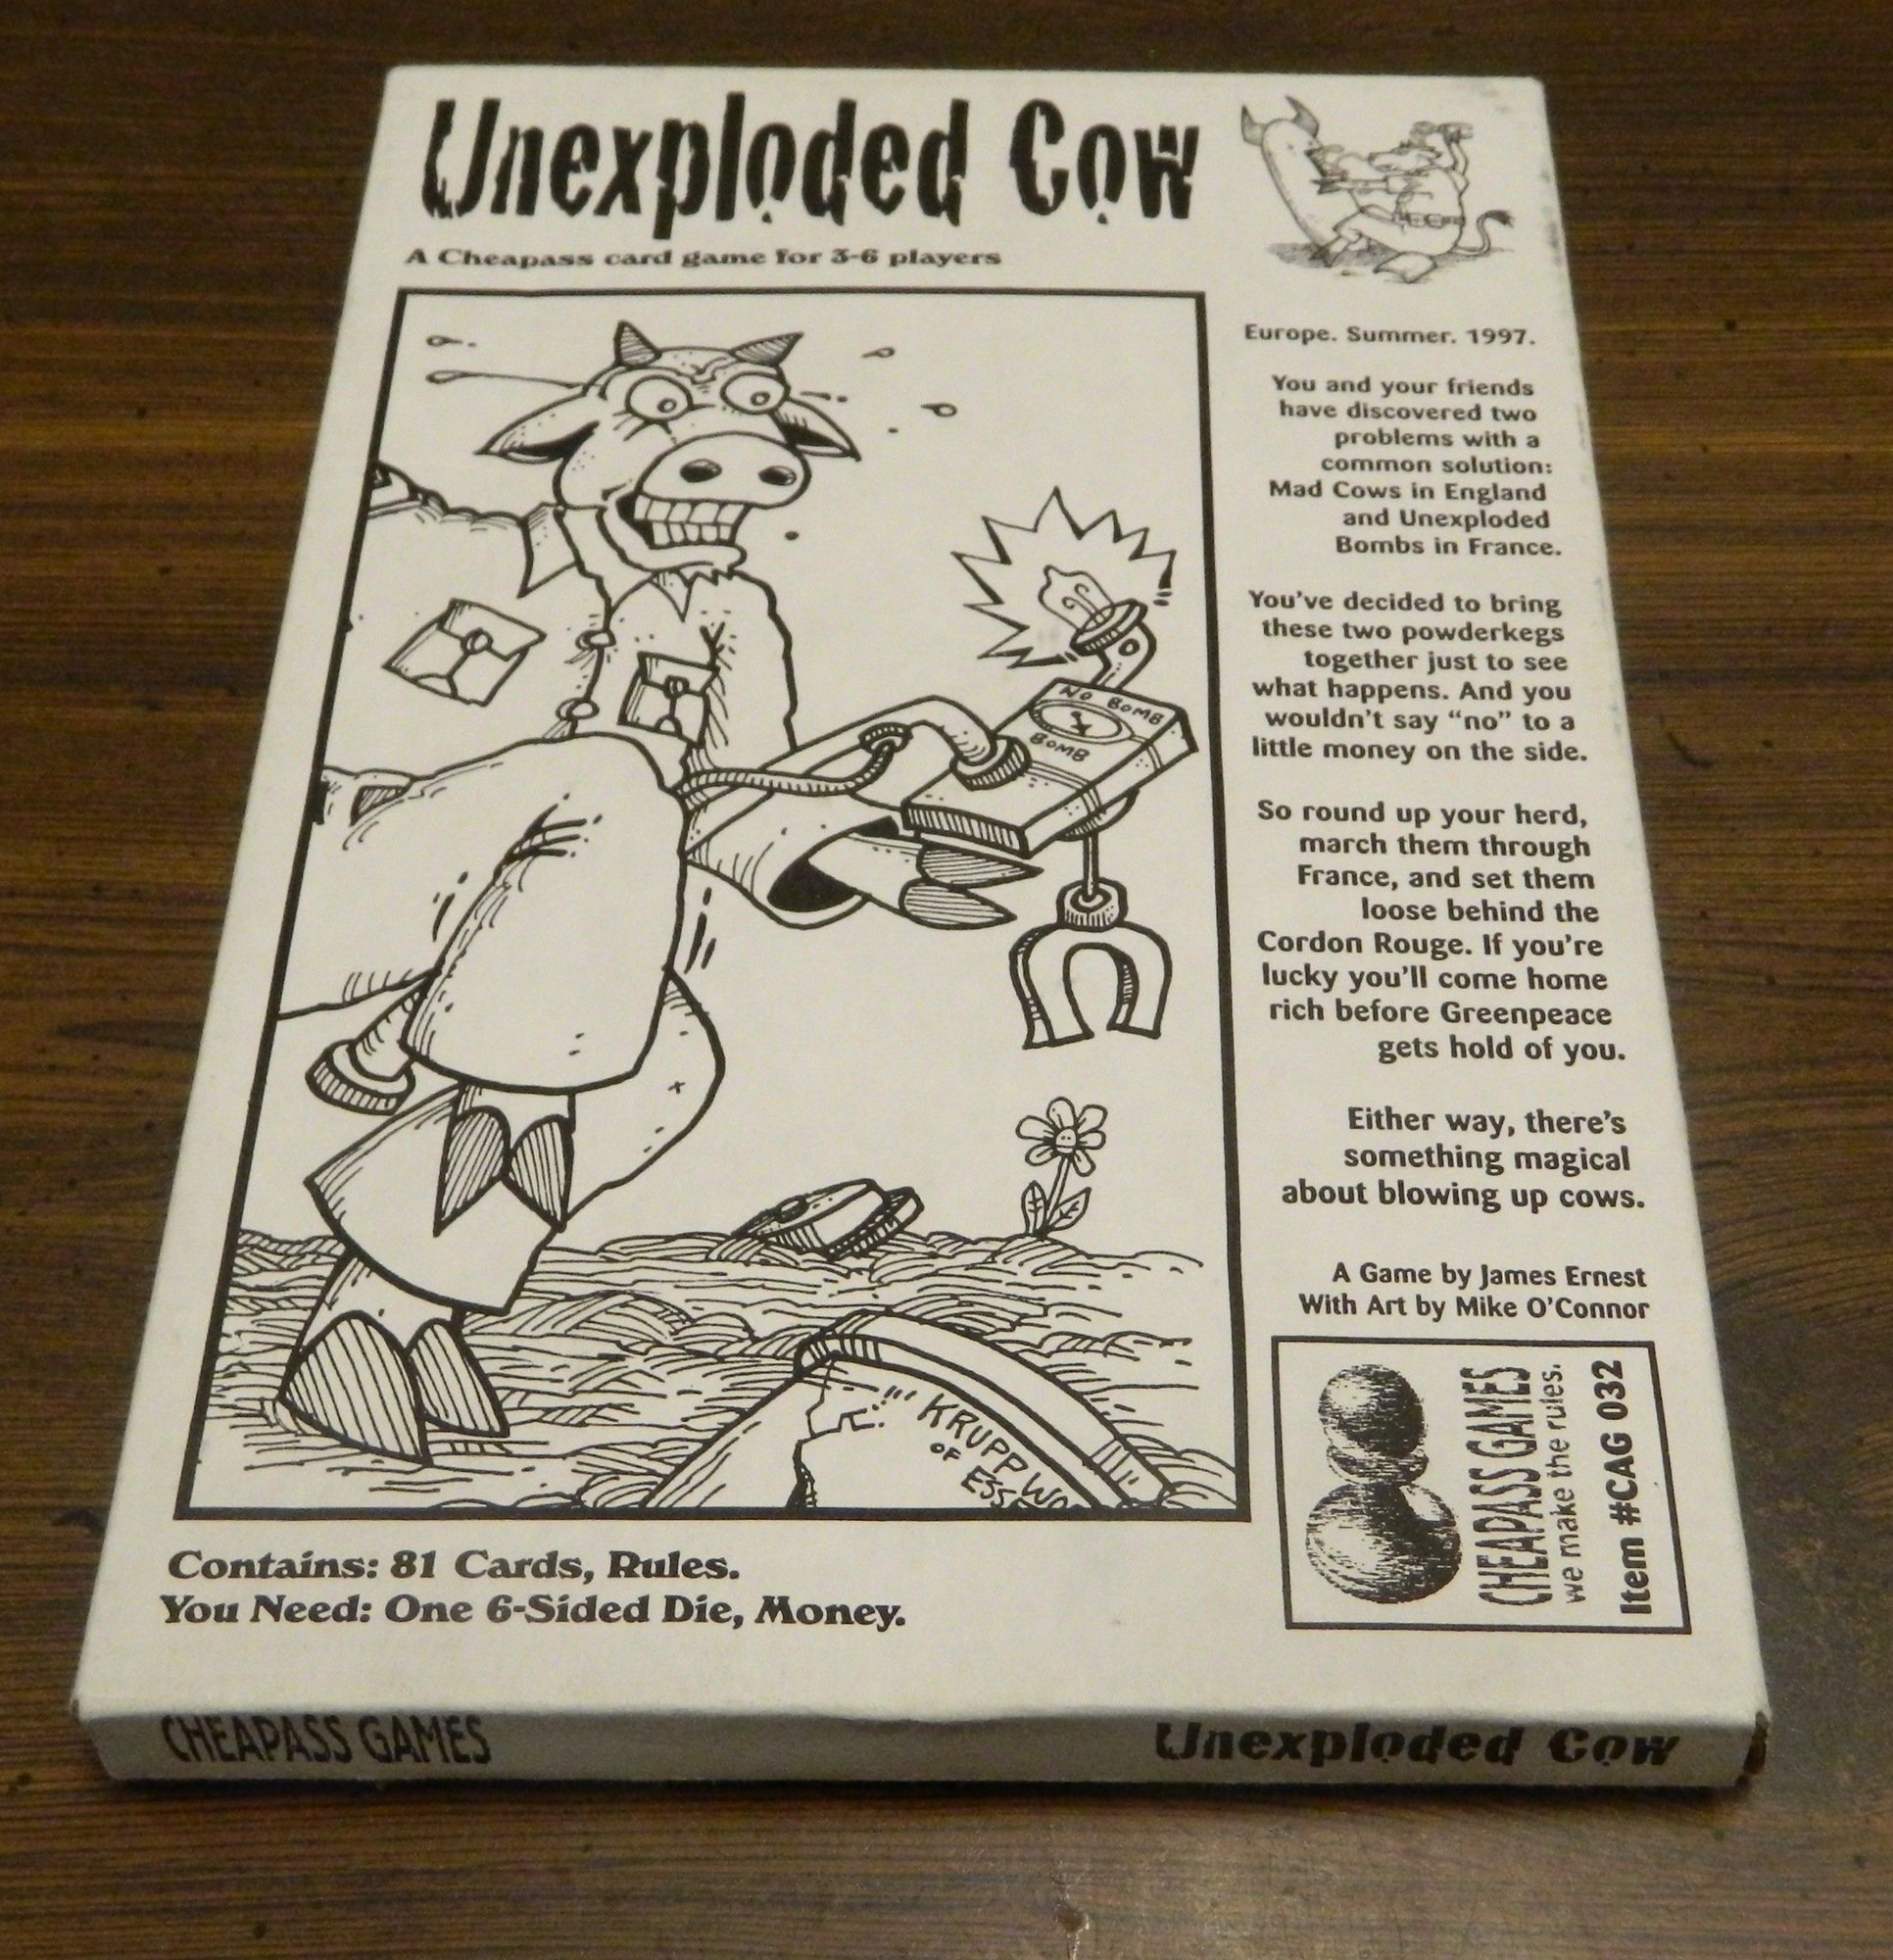 Box for Unexploded Cow